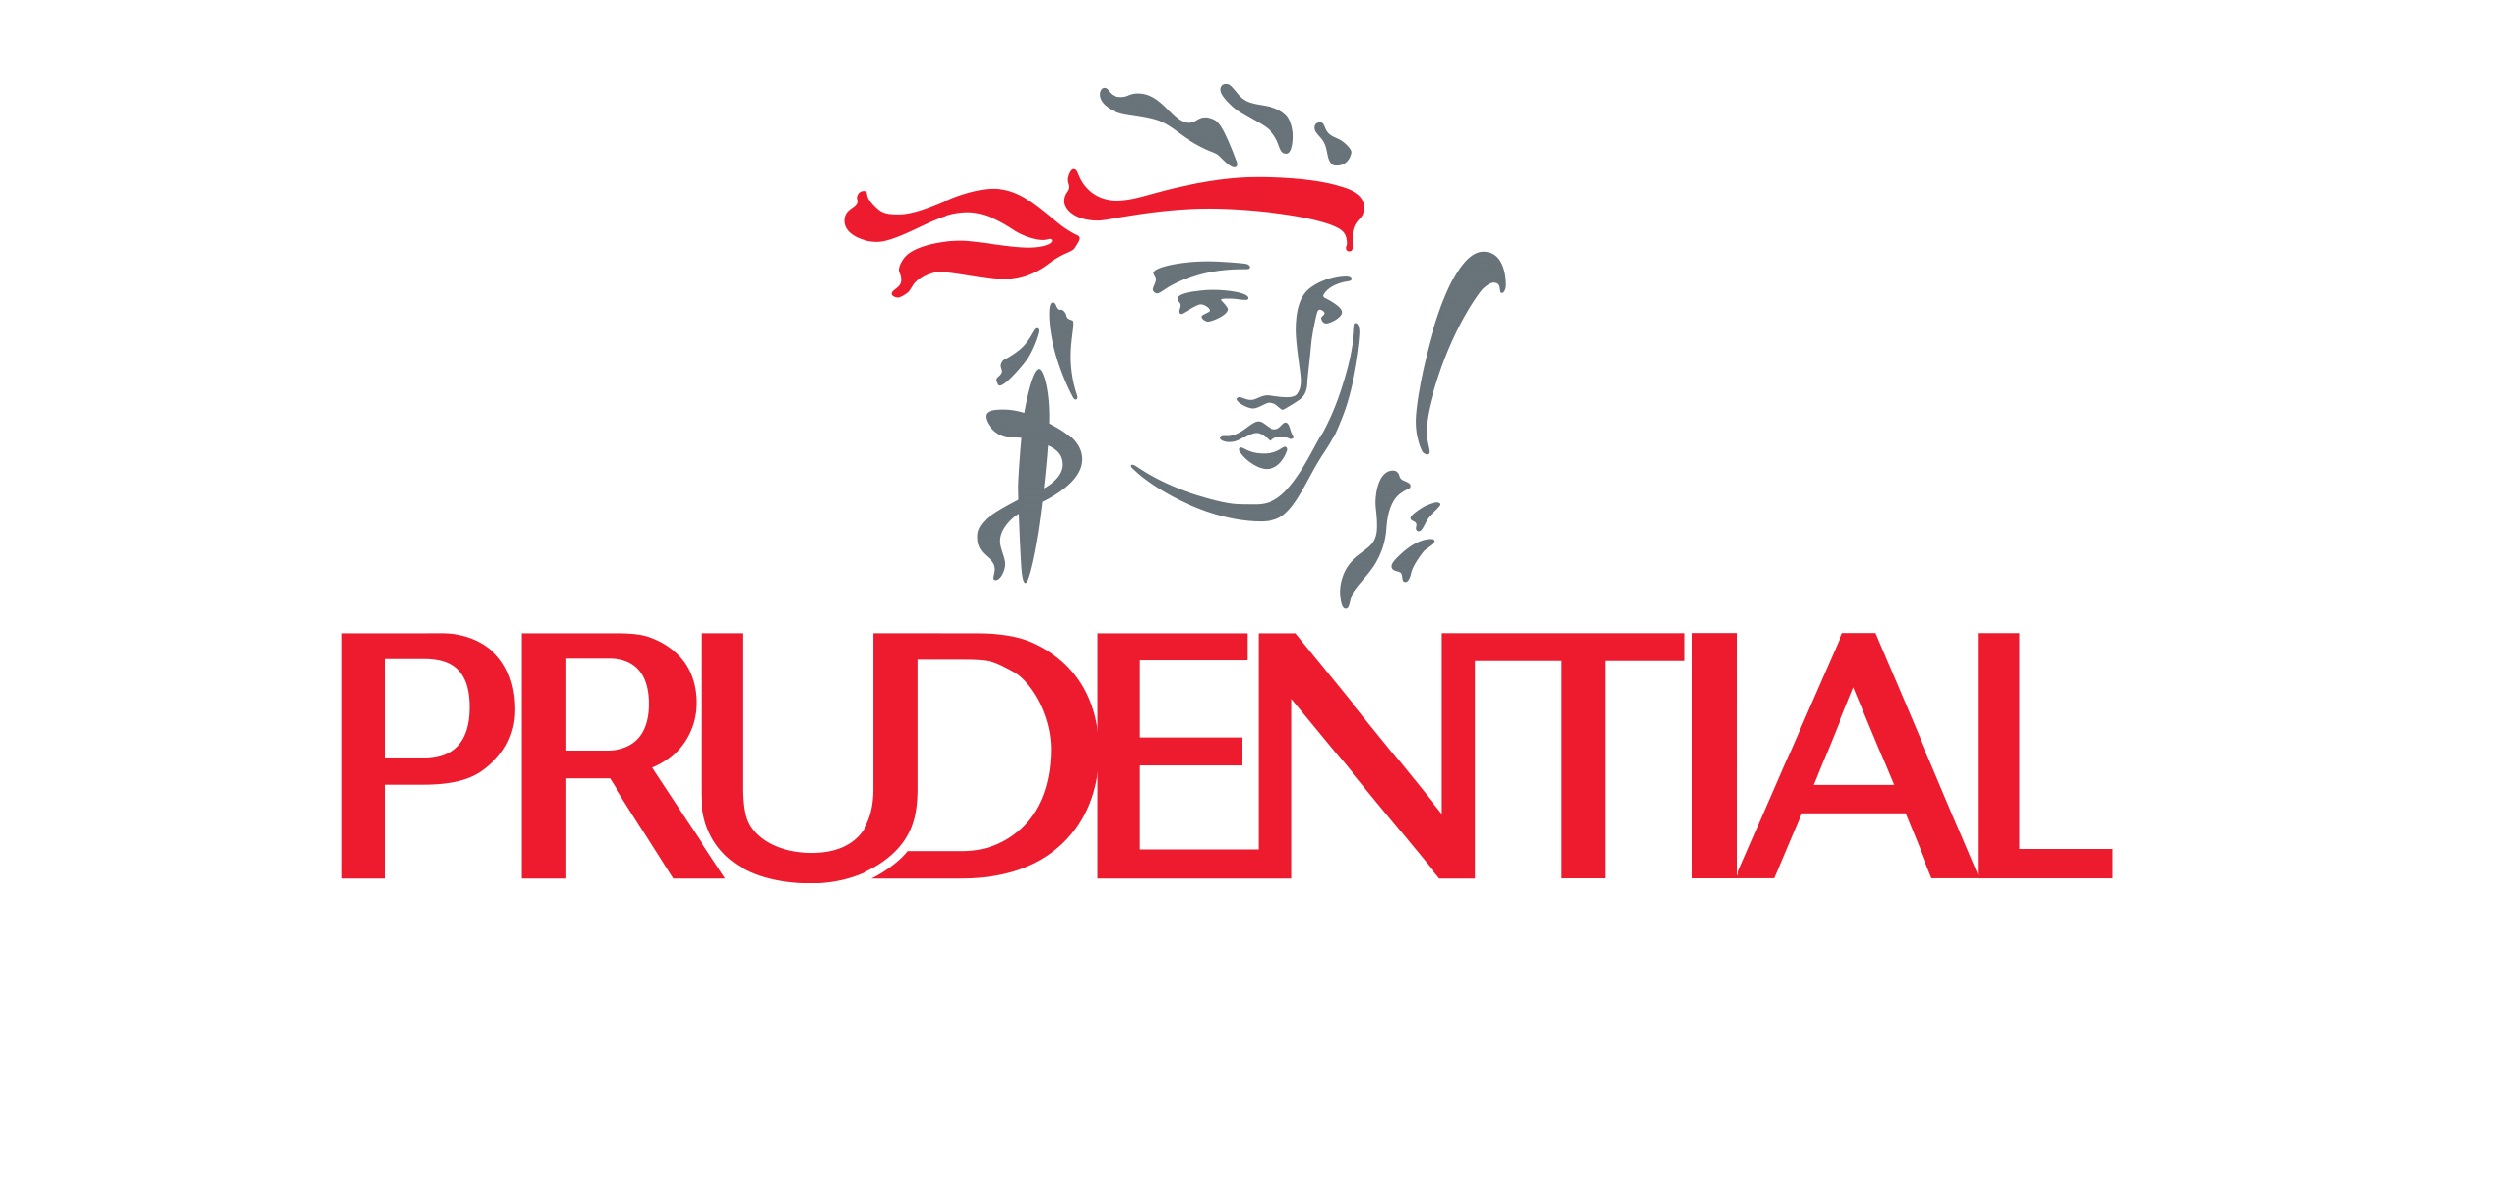 Prudential Việt Nam Tuyển Dụng Thực Tập Sinh Actuarial (Inforce Management) Full-time